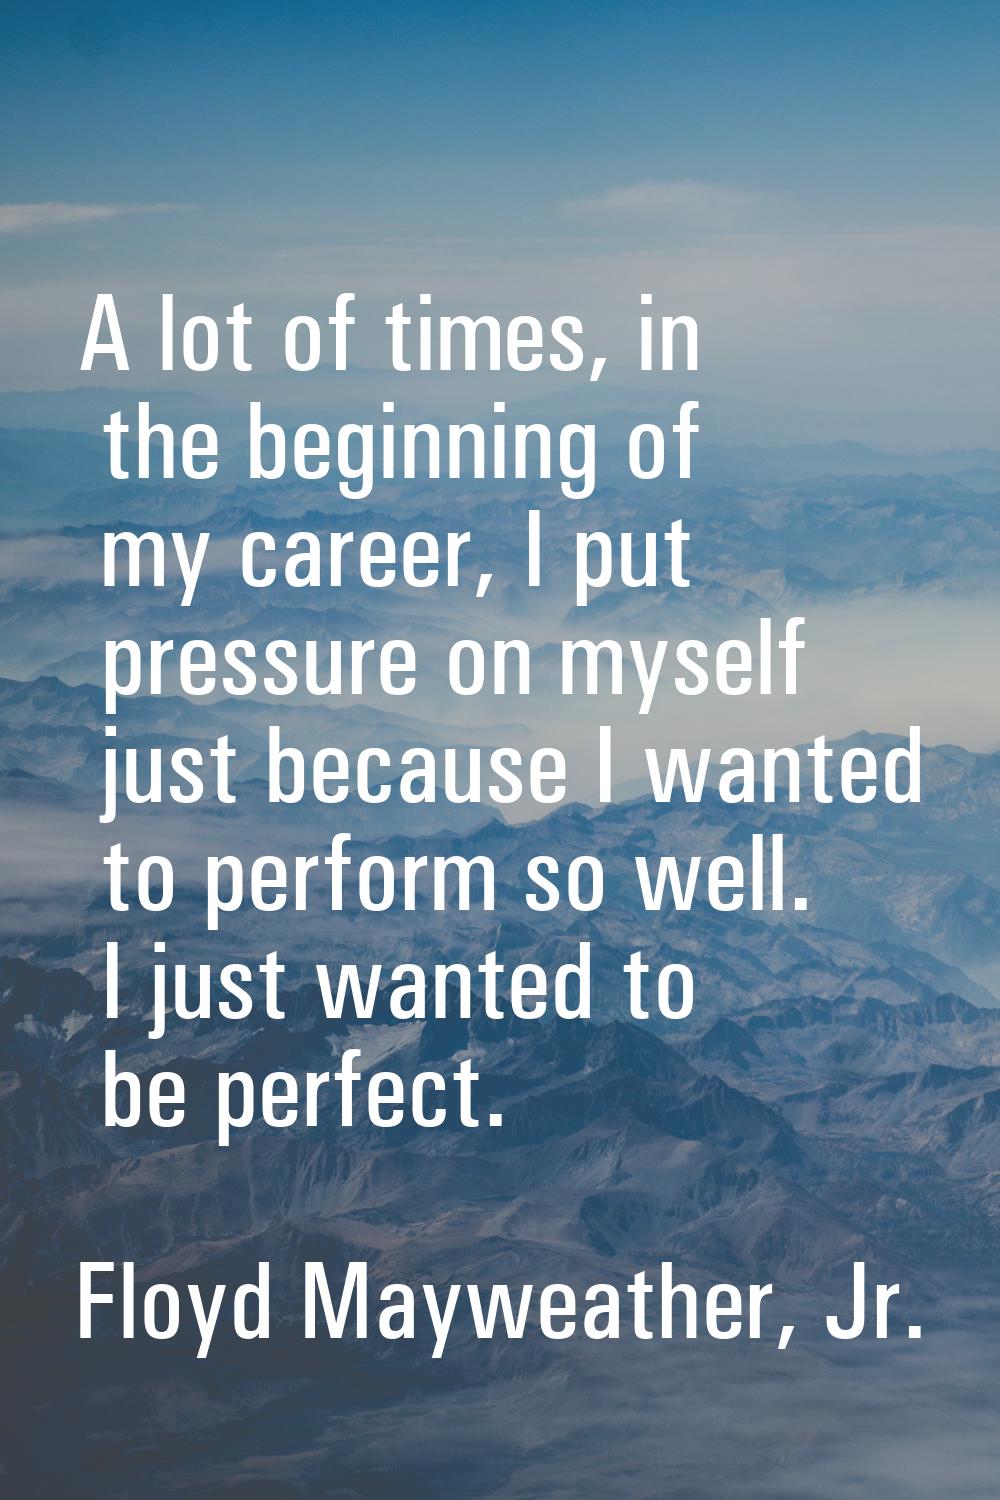 A lot of times, in the beginning of my career, I put pressure on myself just because I wanted to pe